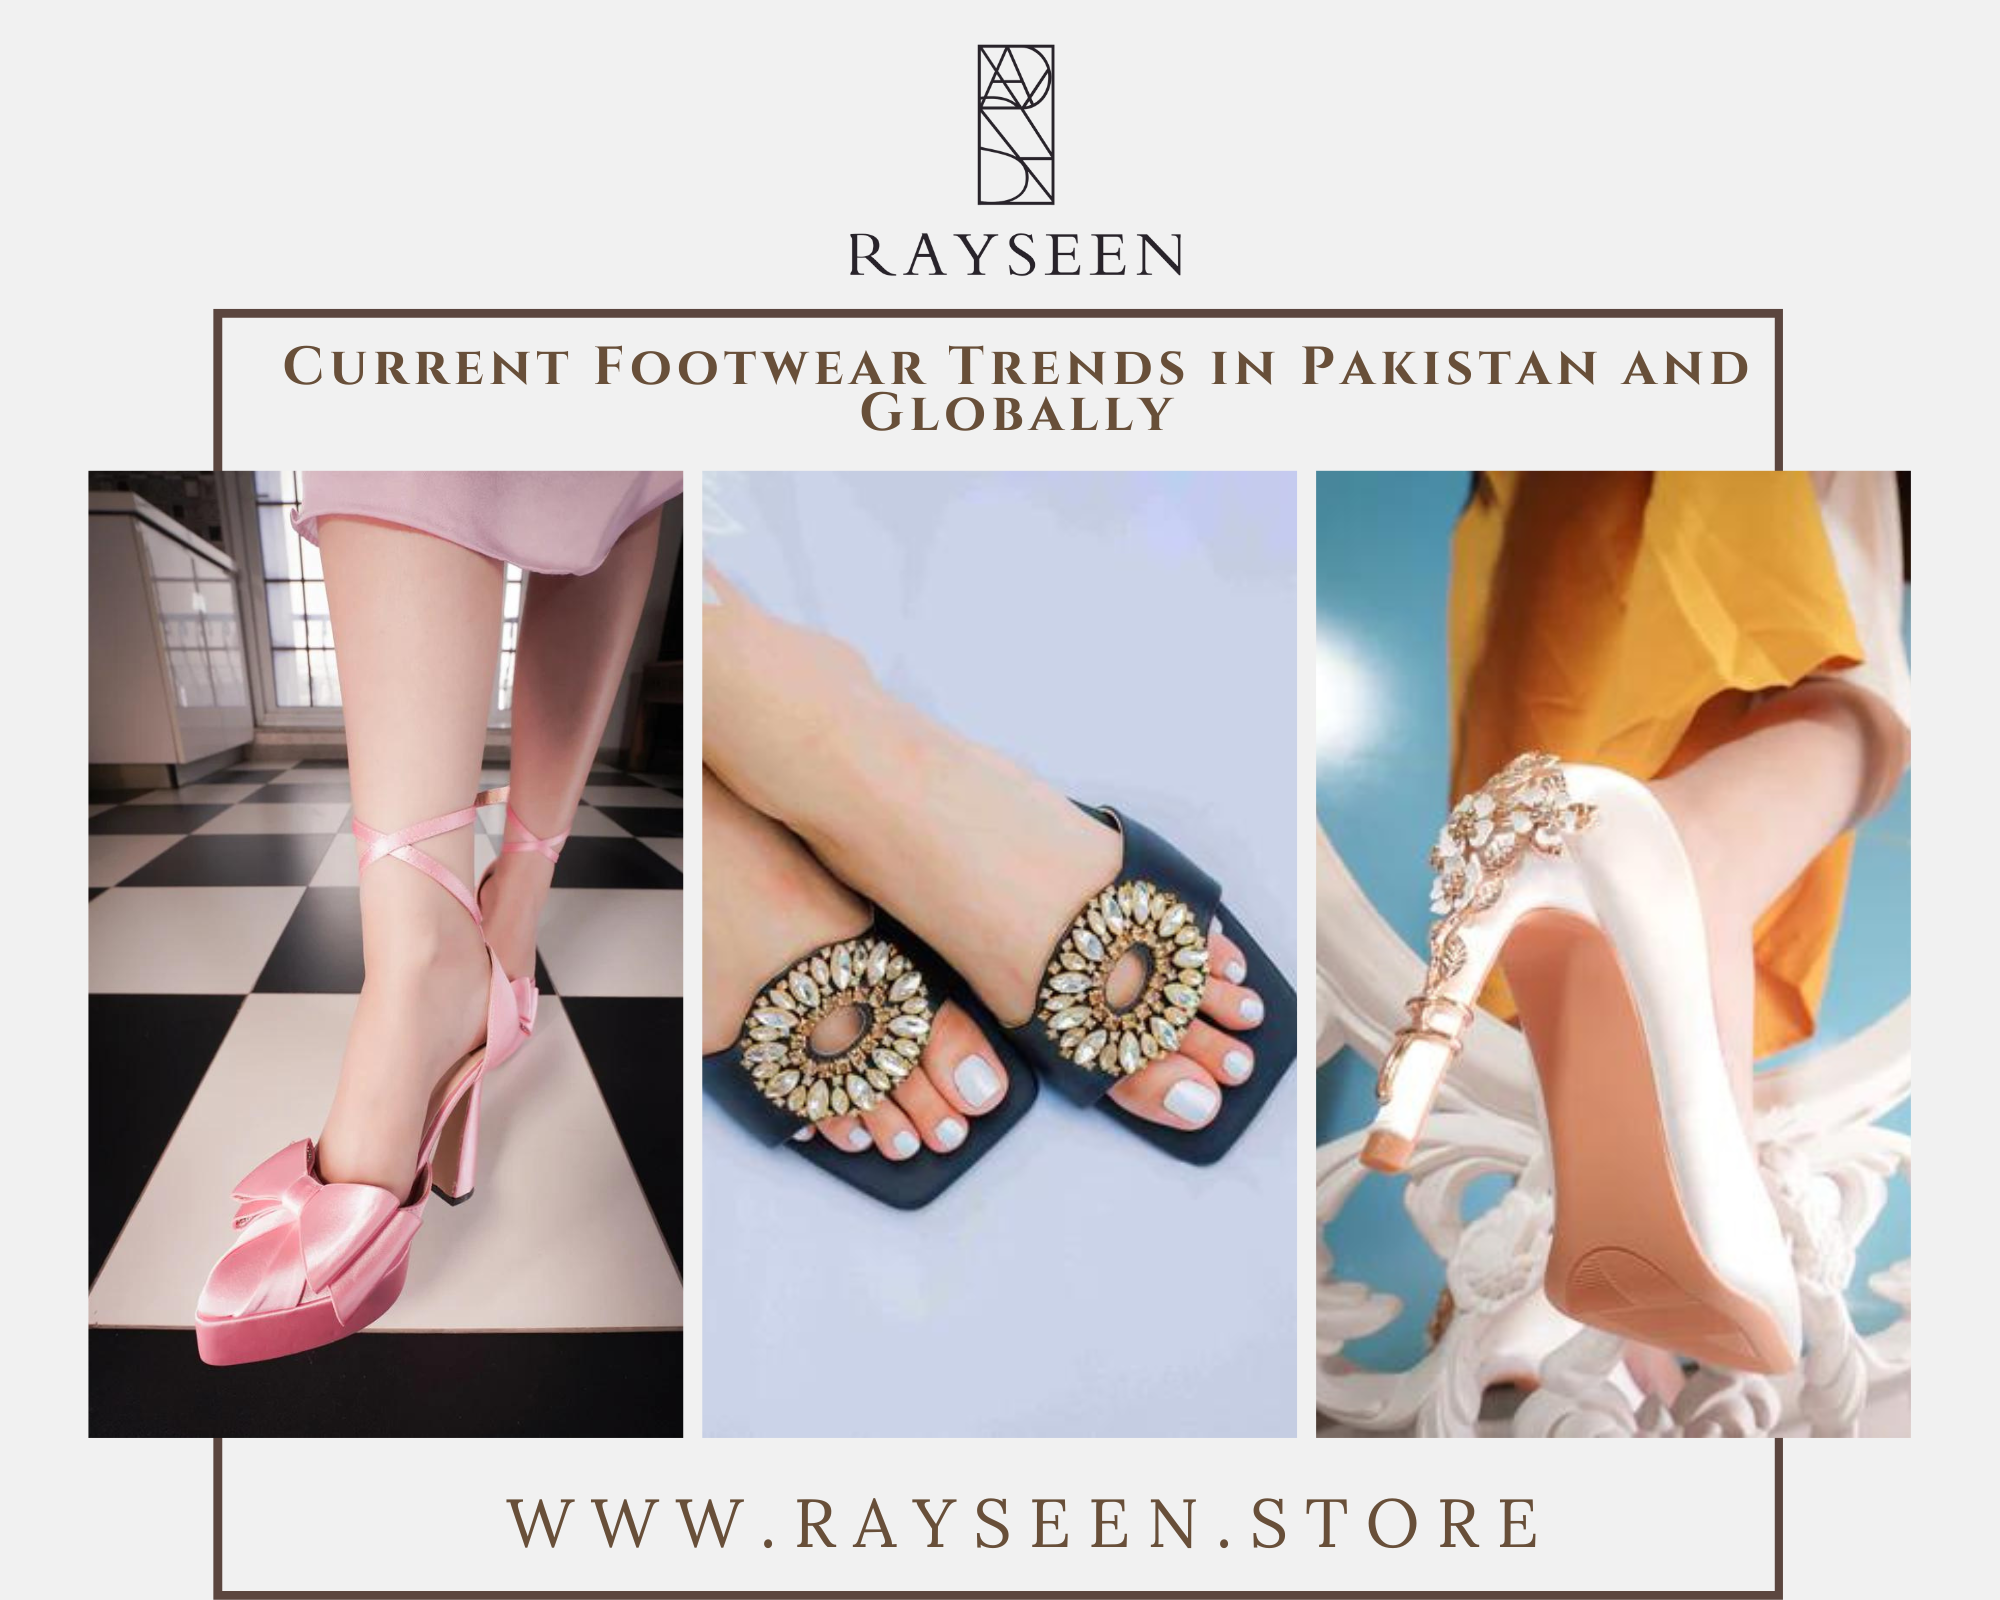 Current Footwear Trends in Pakistan and Globally